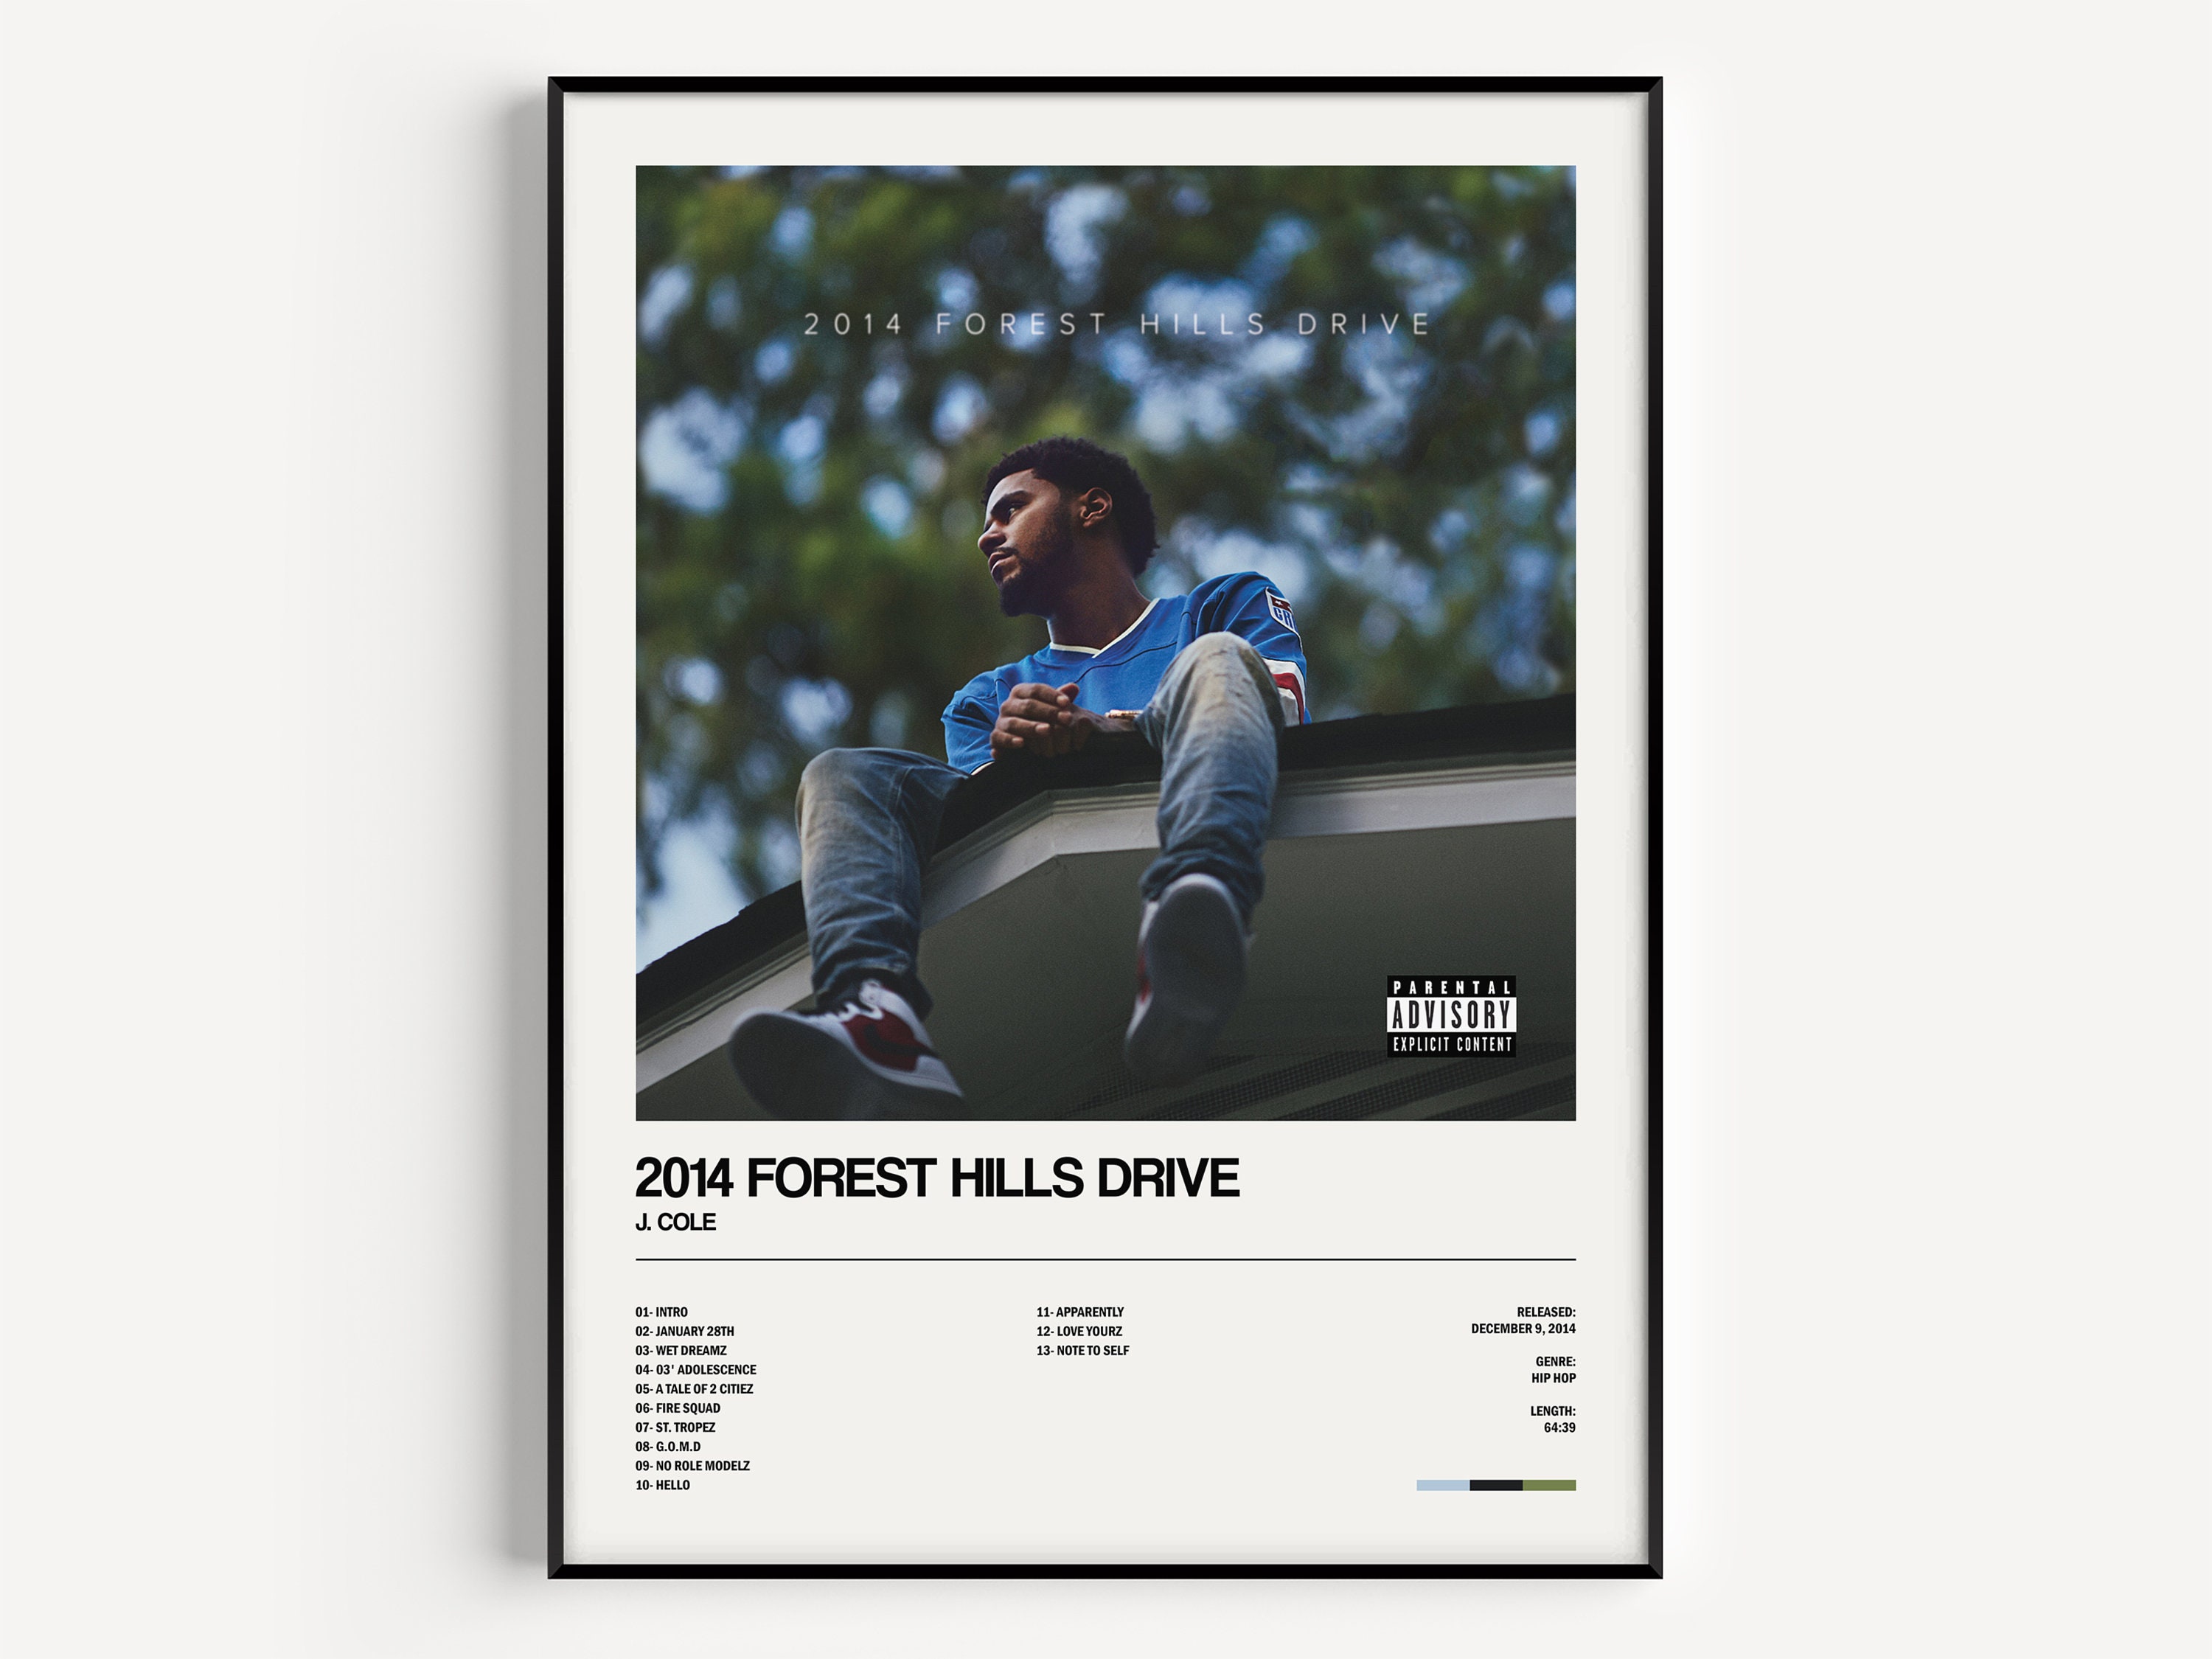 Discover 2014 Forest Hills Drive, J. Cole, 2014 Forest Hills Drive Poster